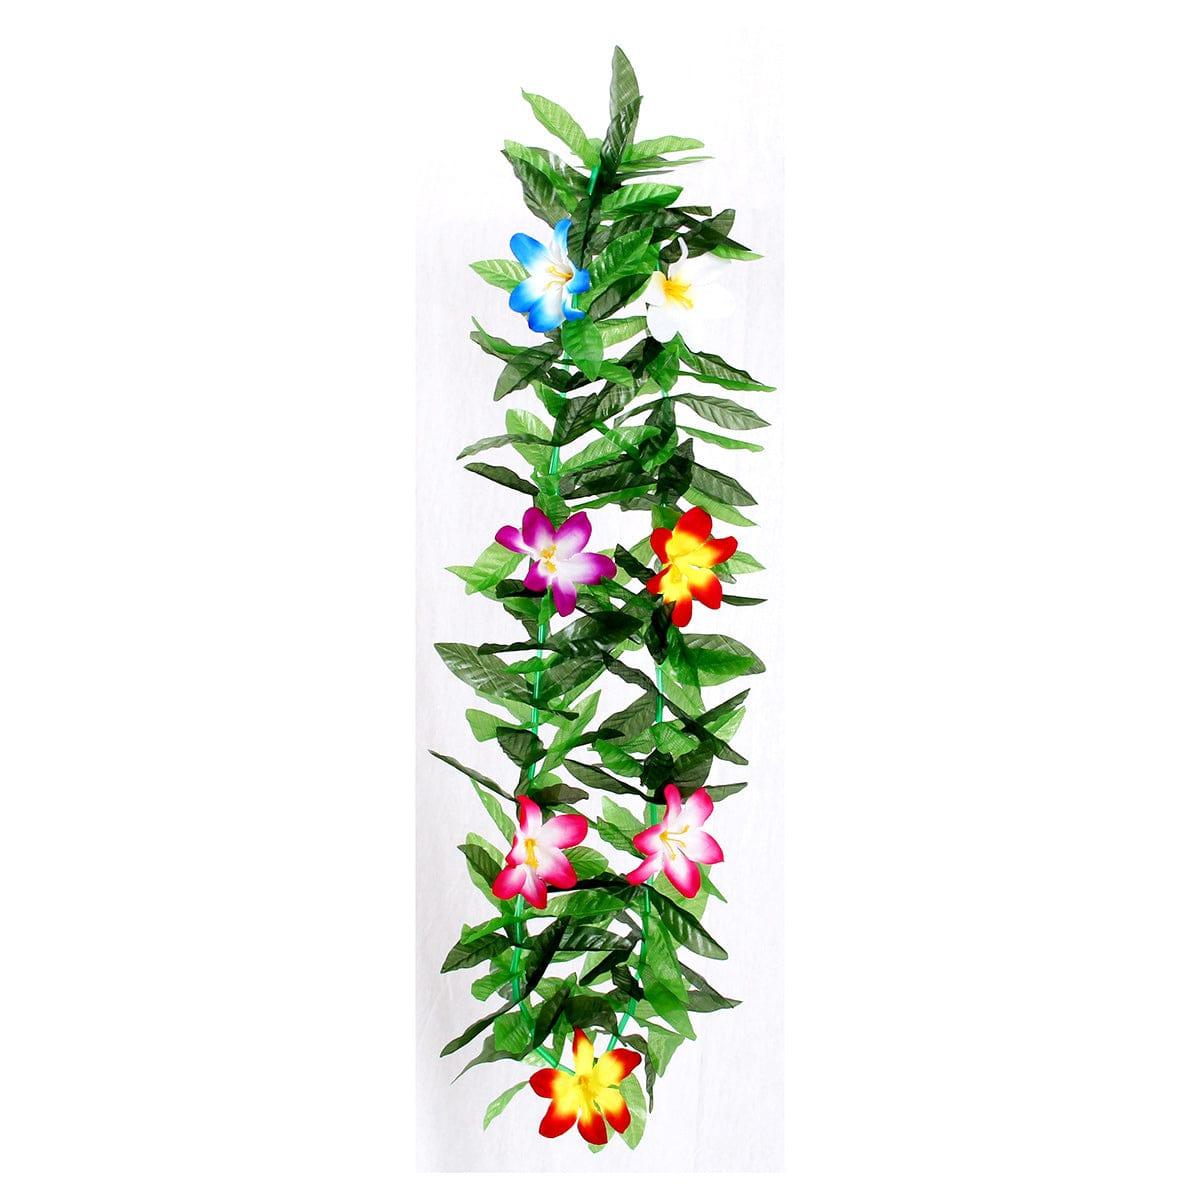 LIANGSHAN DAJIN GIFTS & TOYS CO LTD Theme Party Honolulu Flower Lei Necklace with Leaves, Multicolour